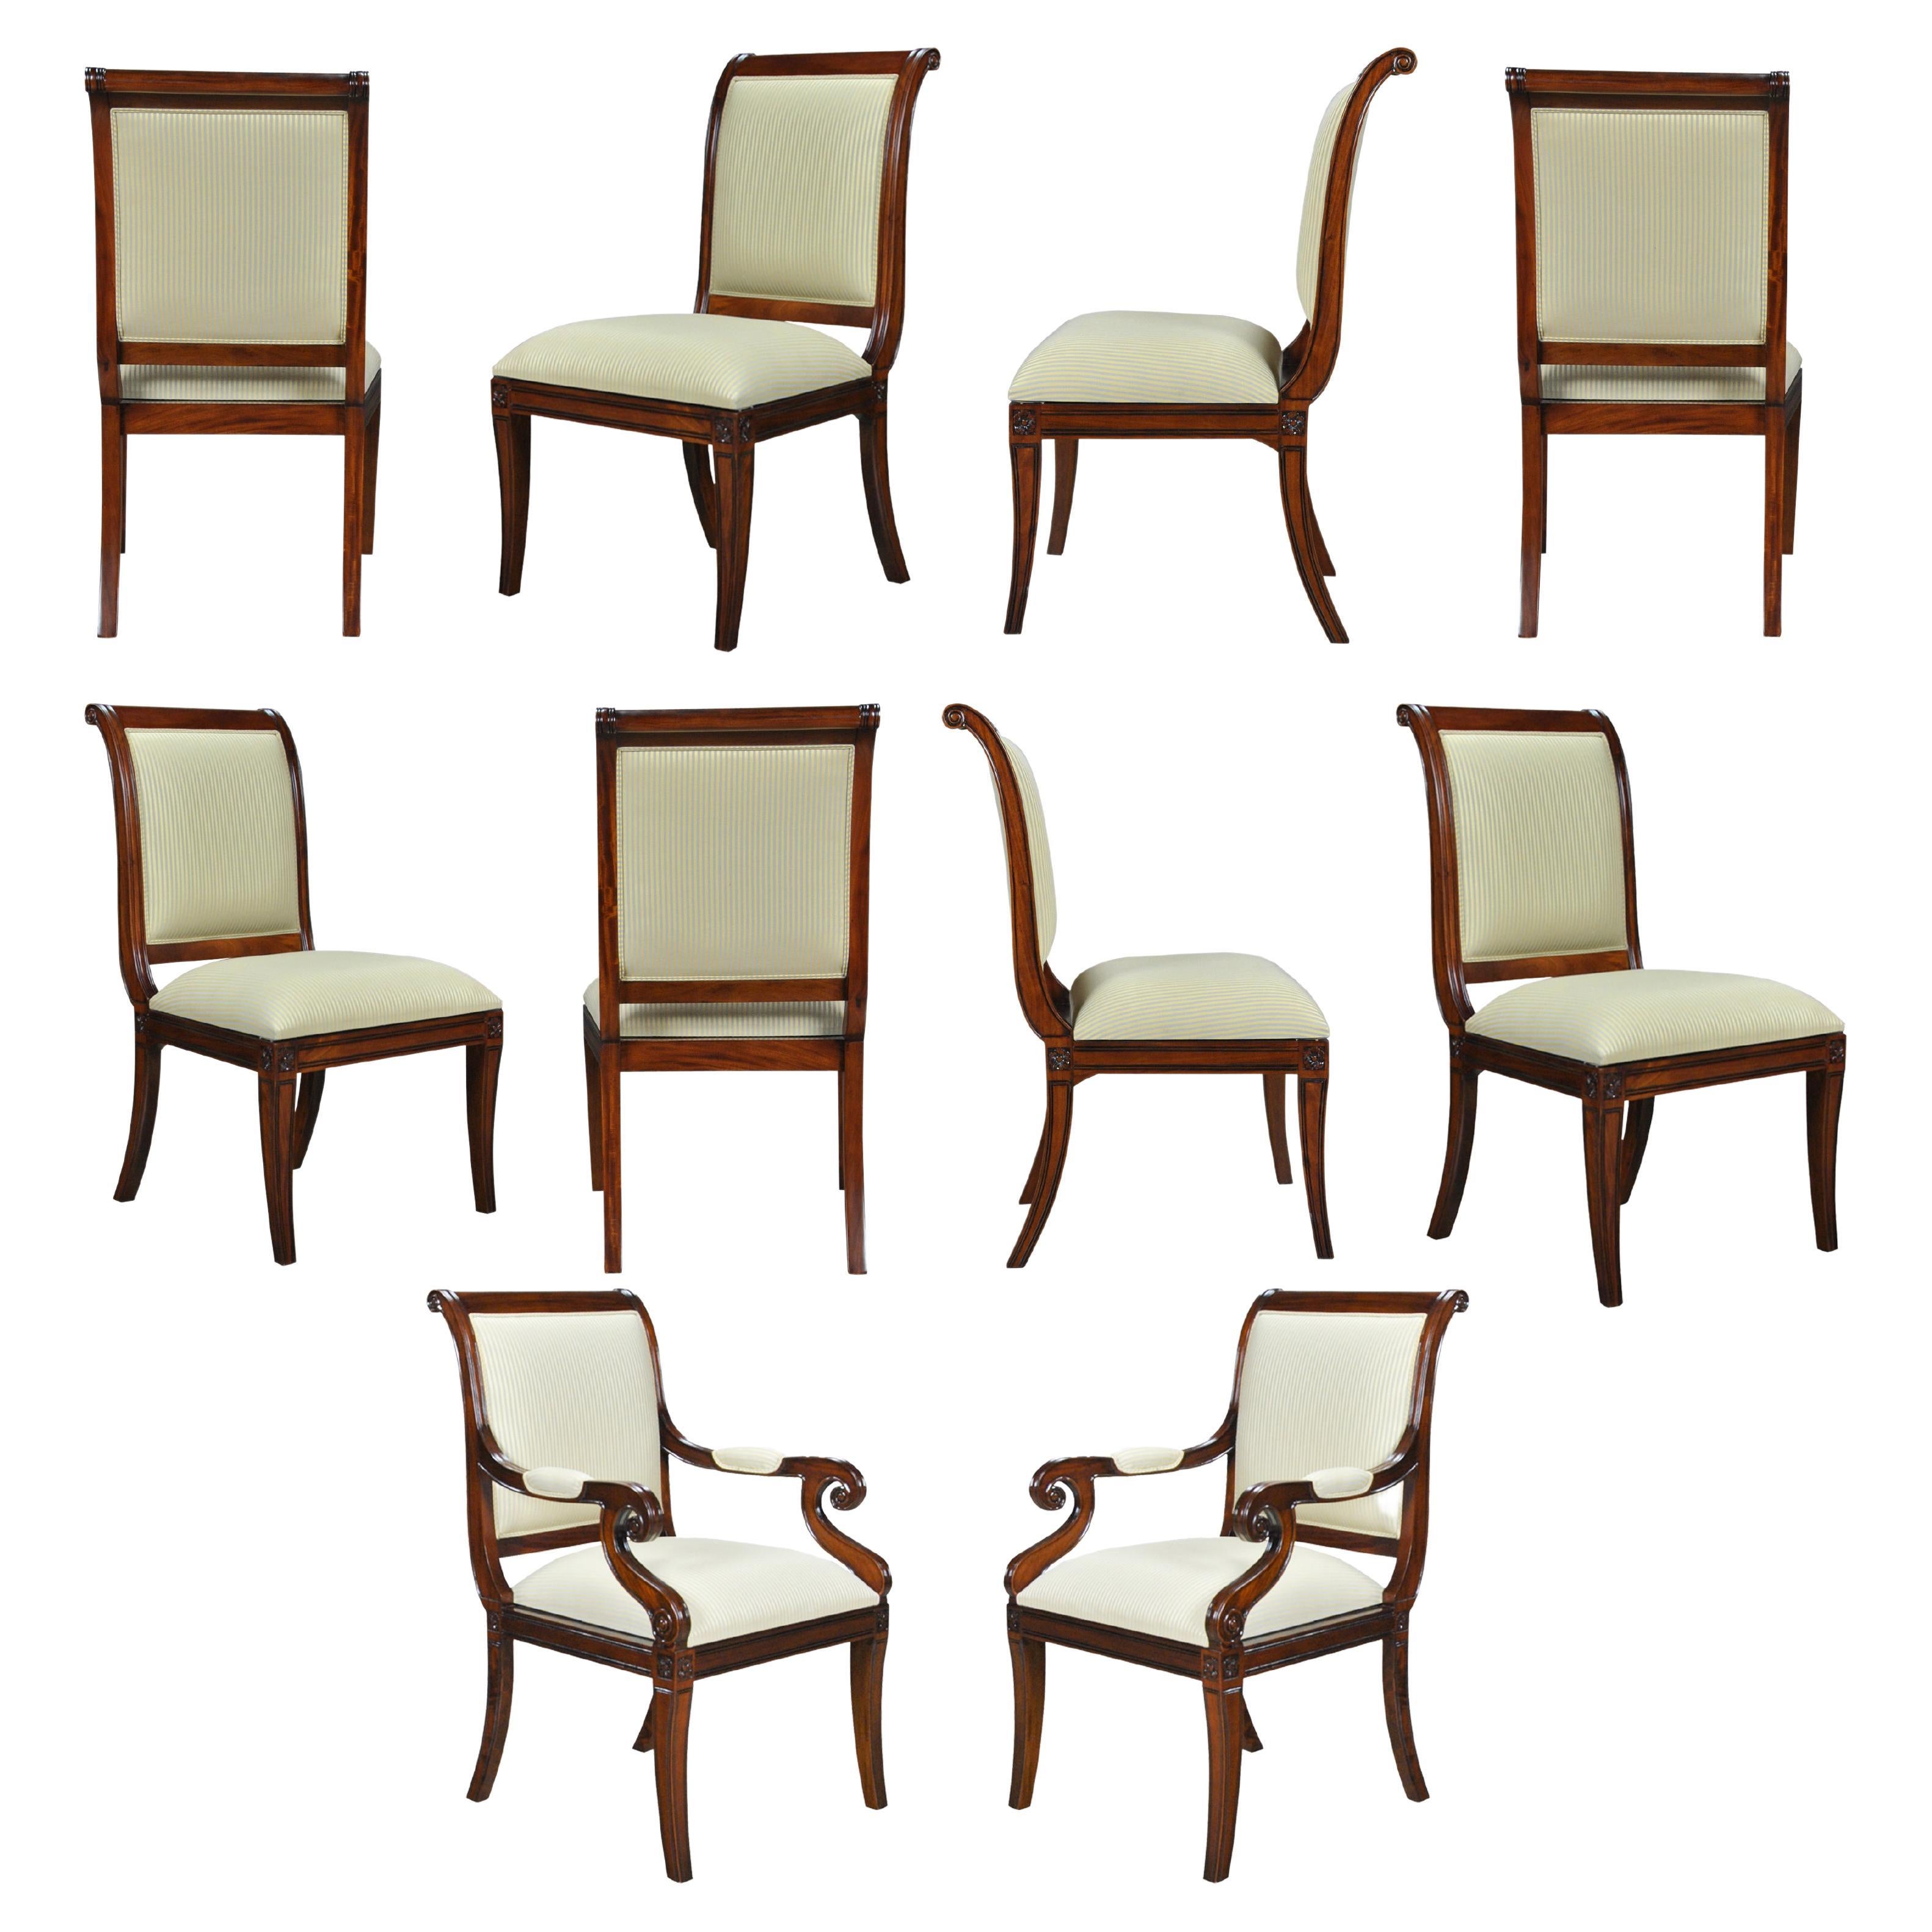 Regency Upholstered Chairs, Set of 10 